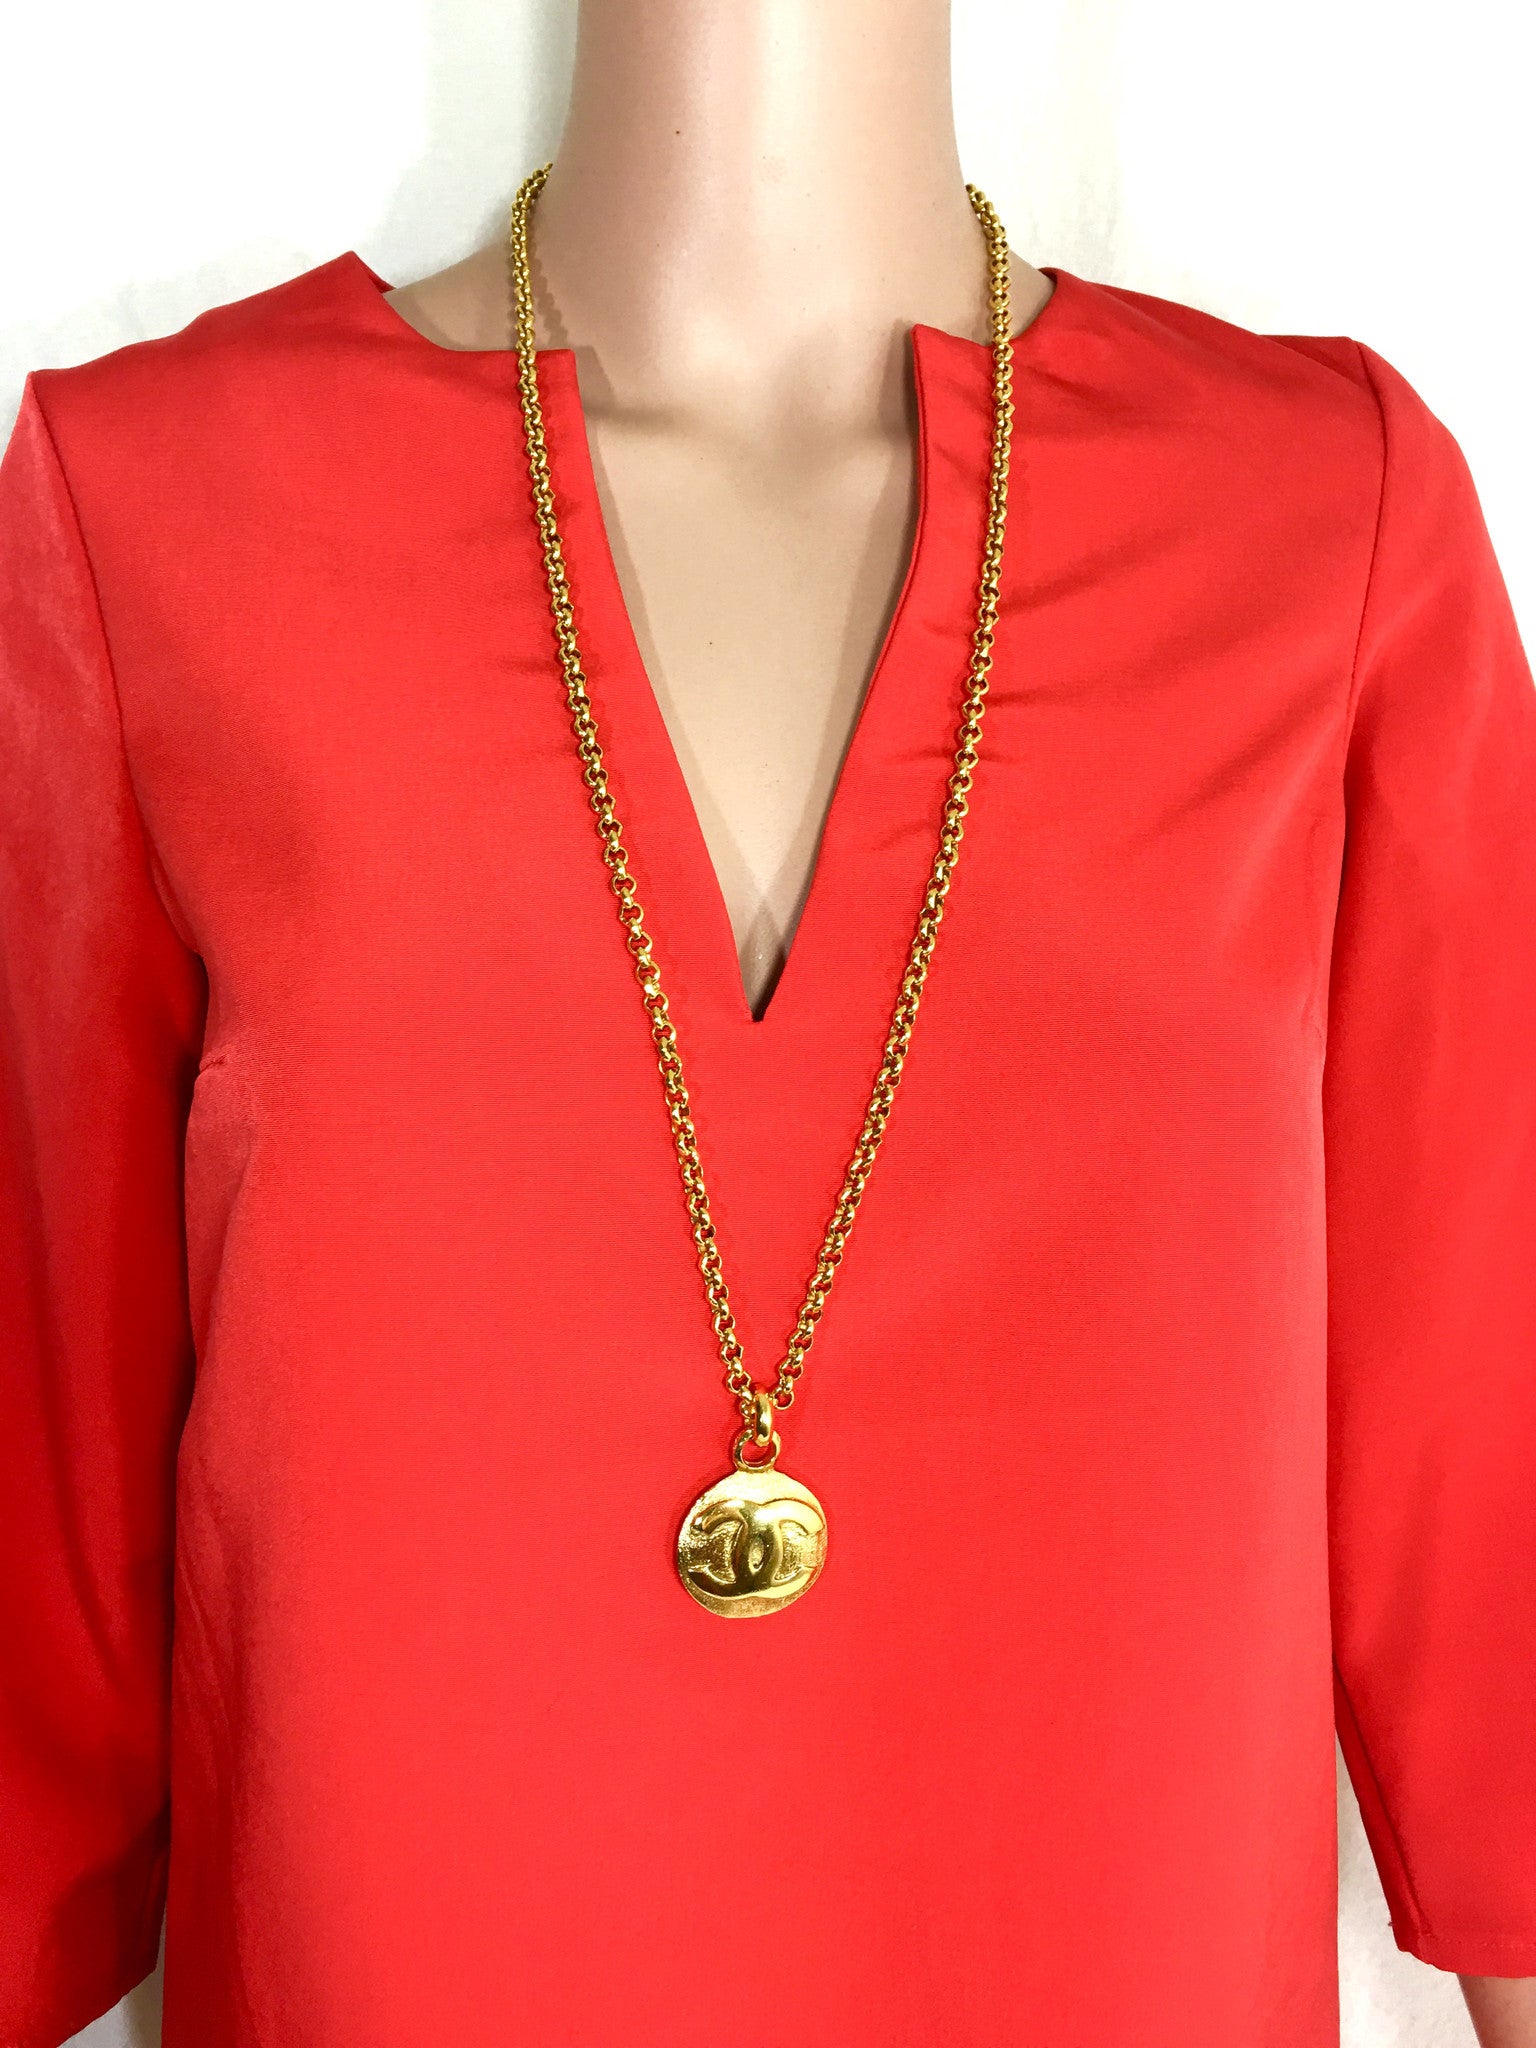 CHANEL Gold Necklace with CC Pendant